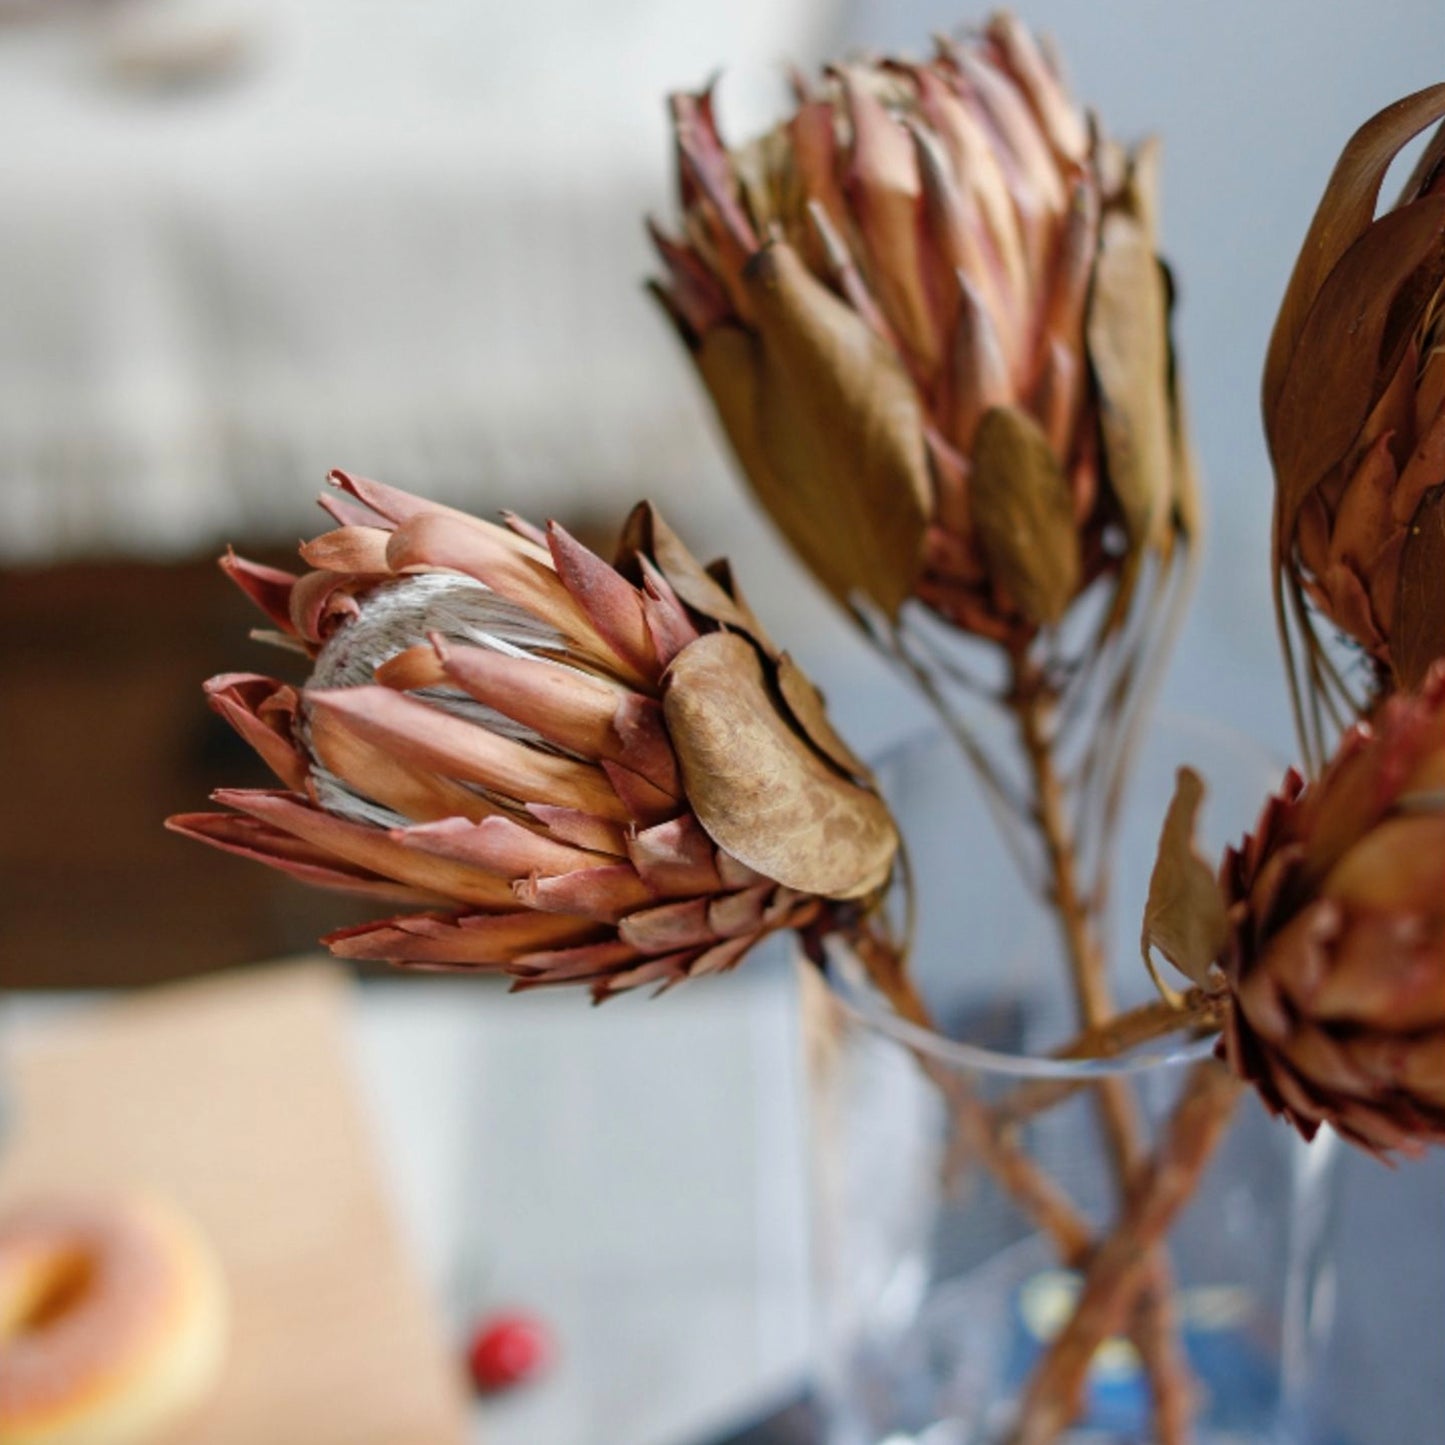 2 Stems Natural Dried Protea Flowers | 2 Colors